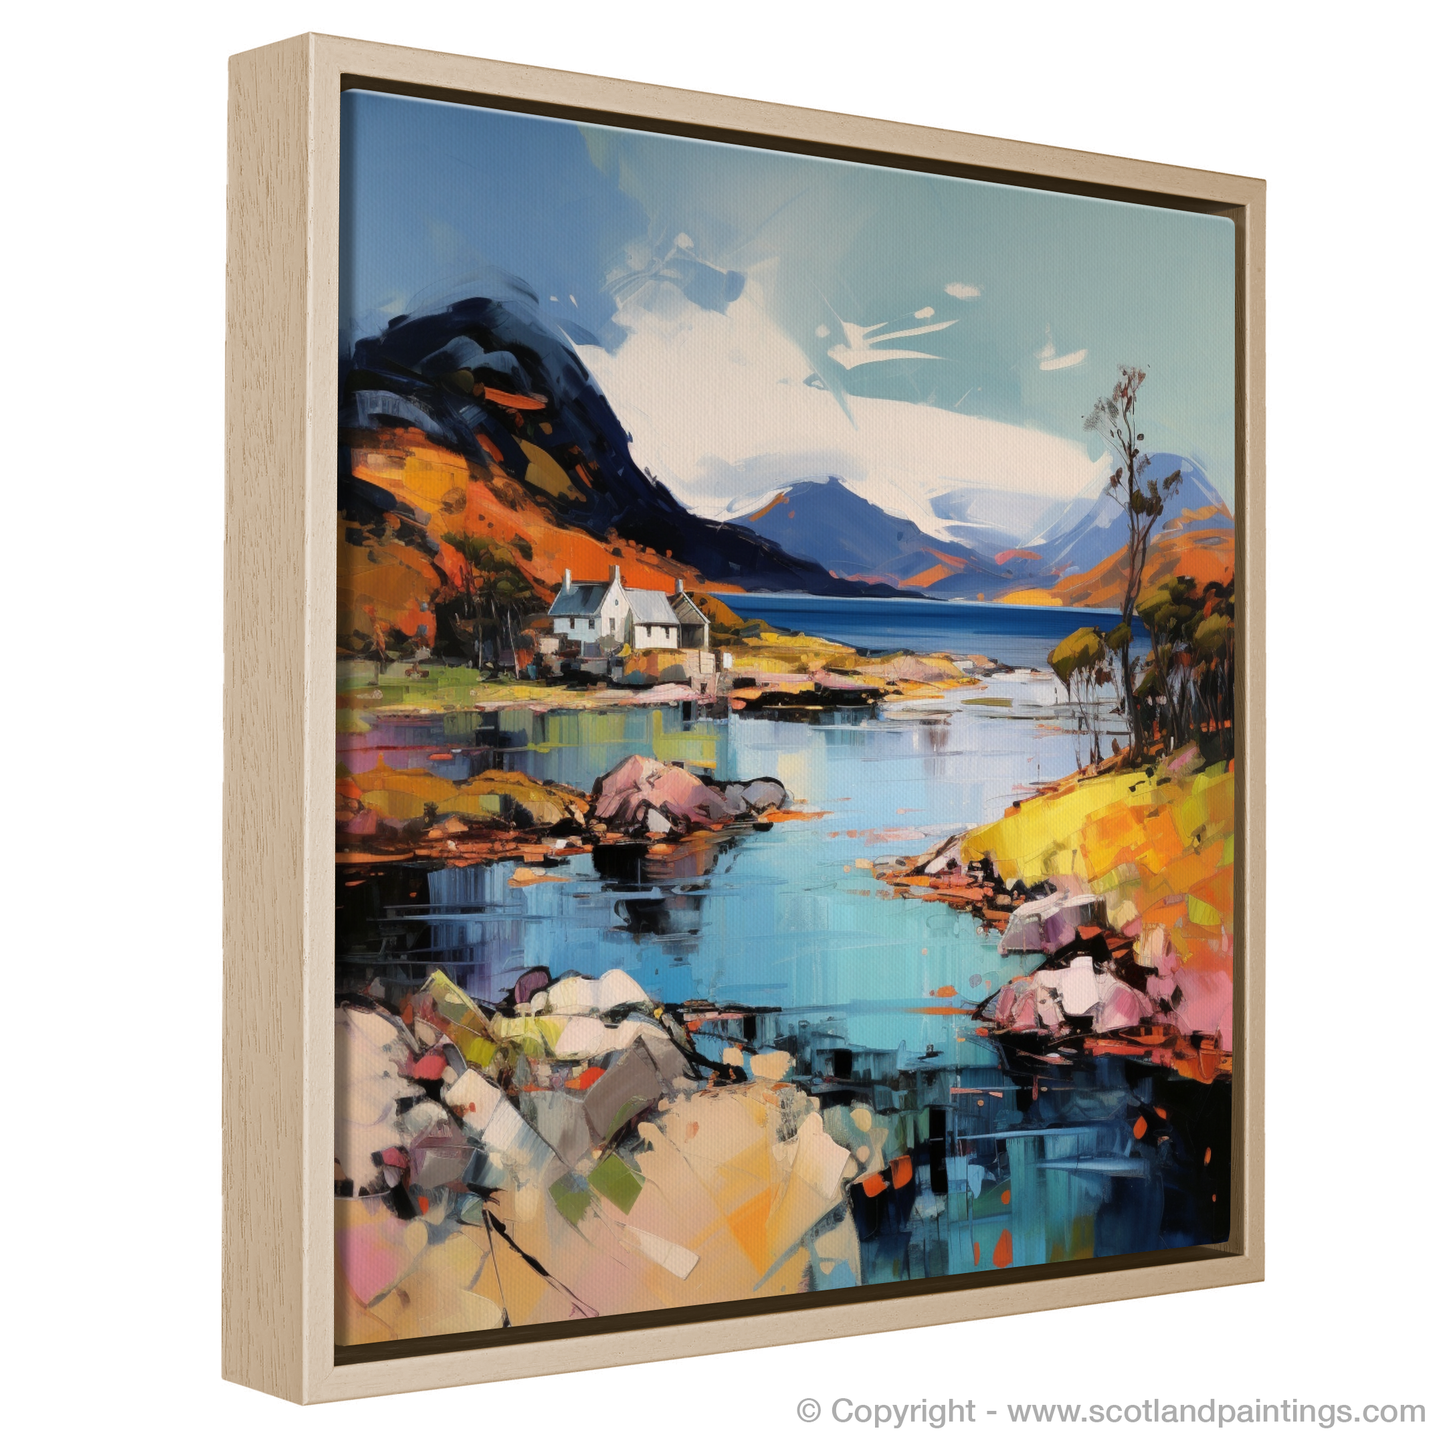 Painting and Art Print of Shieldaig Bay, Wester Ross entitled "Emergence of the Rugged Splendour: An Expressionist Ode to Shieldaig Bay".